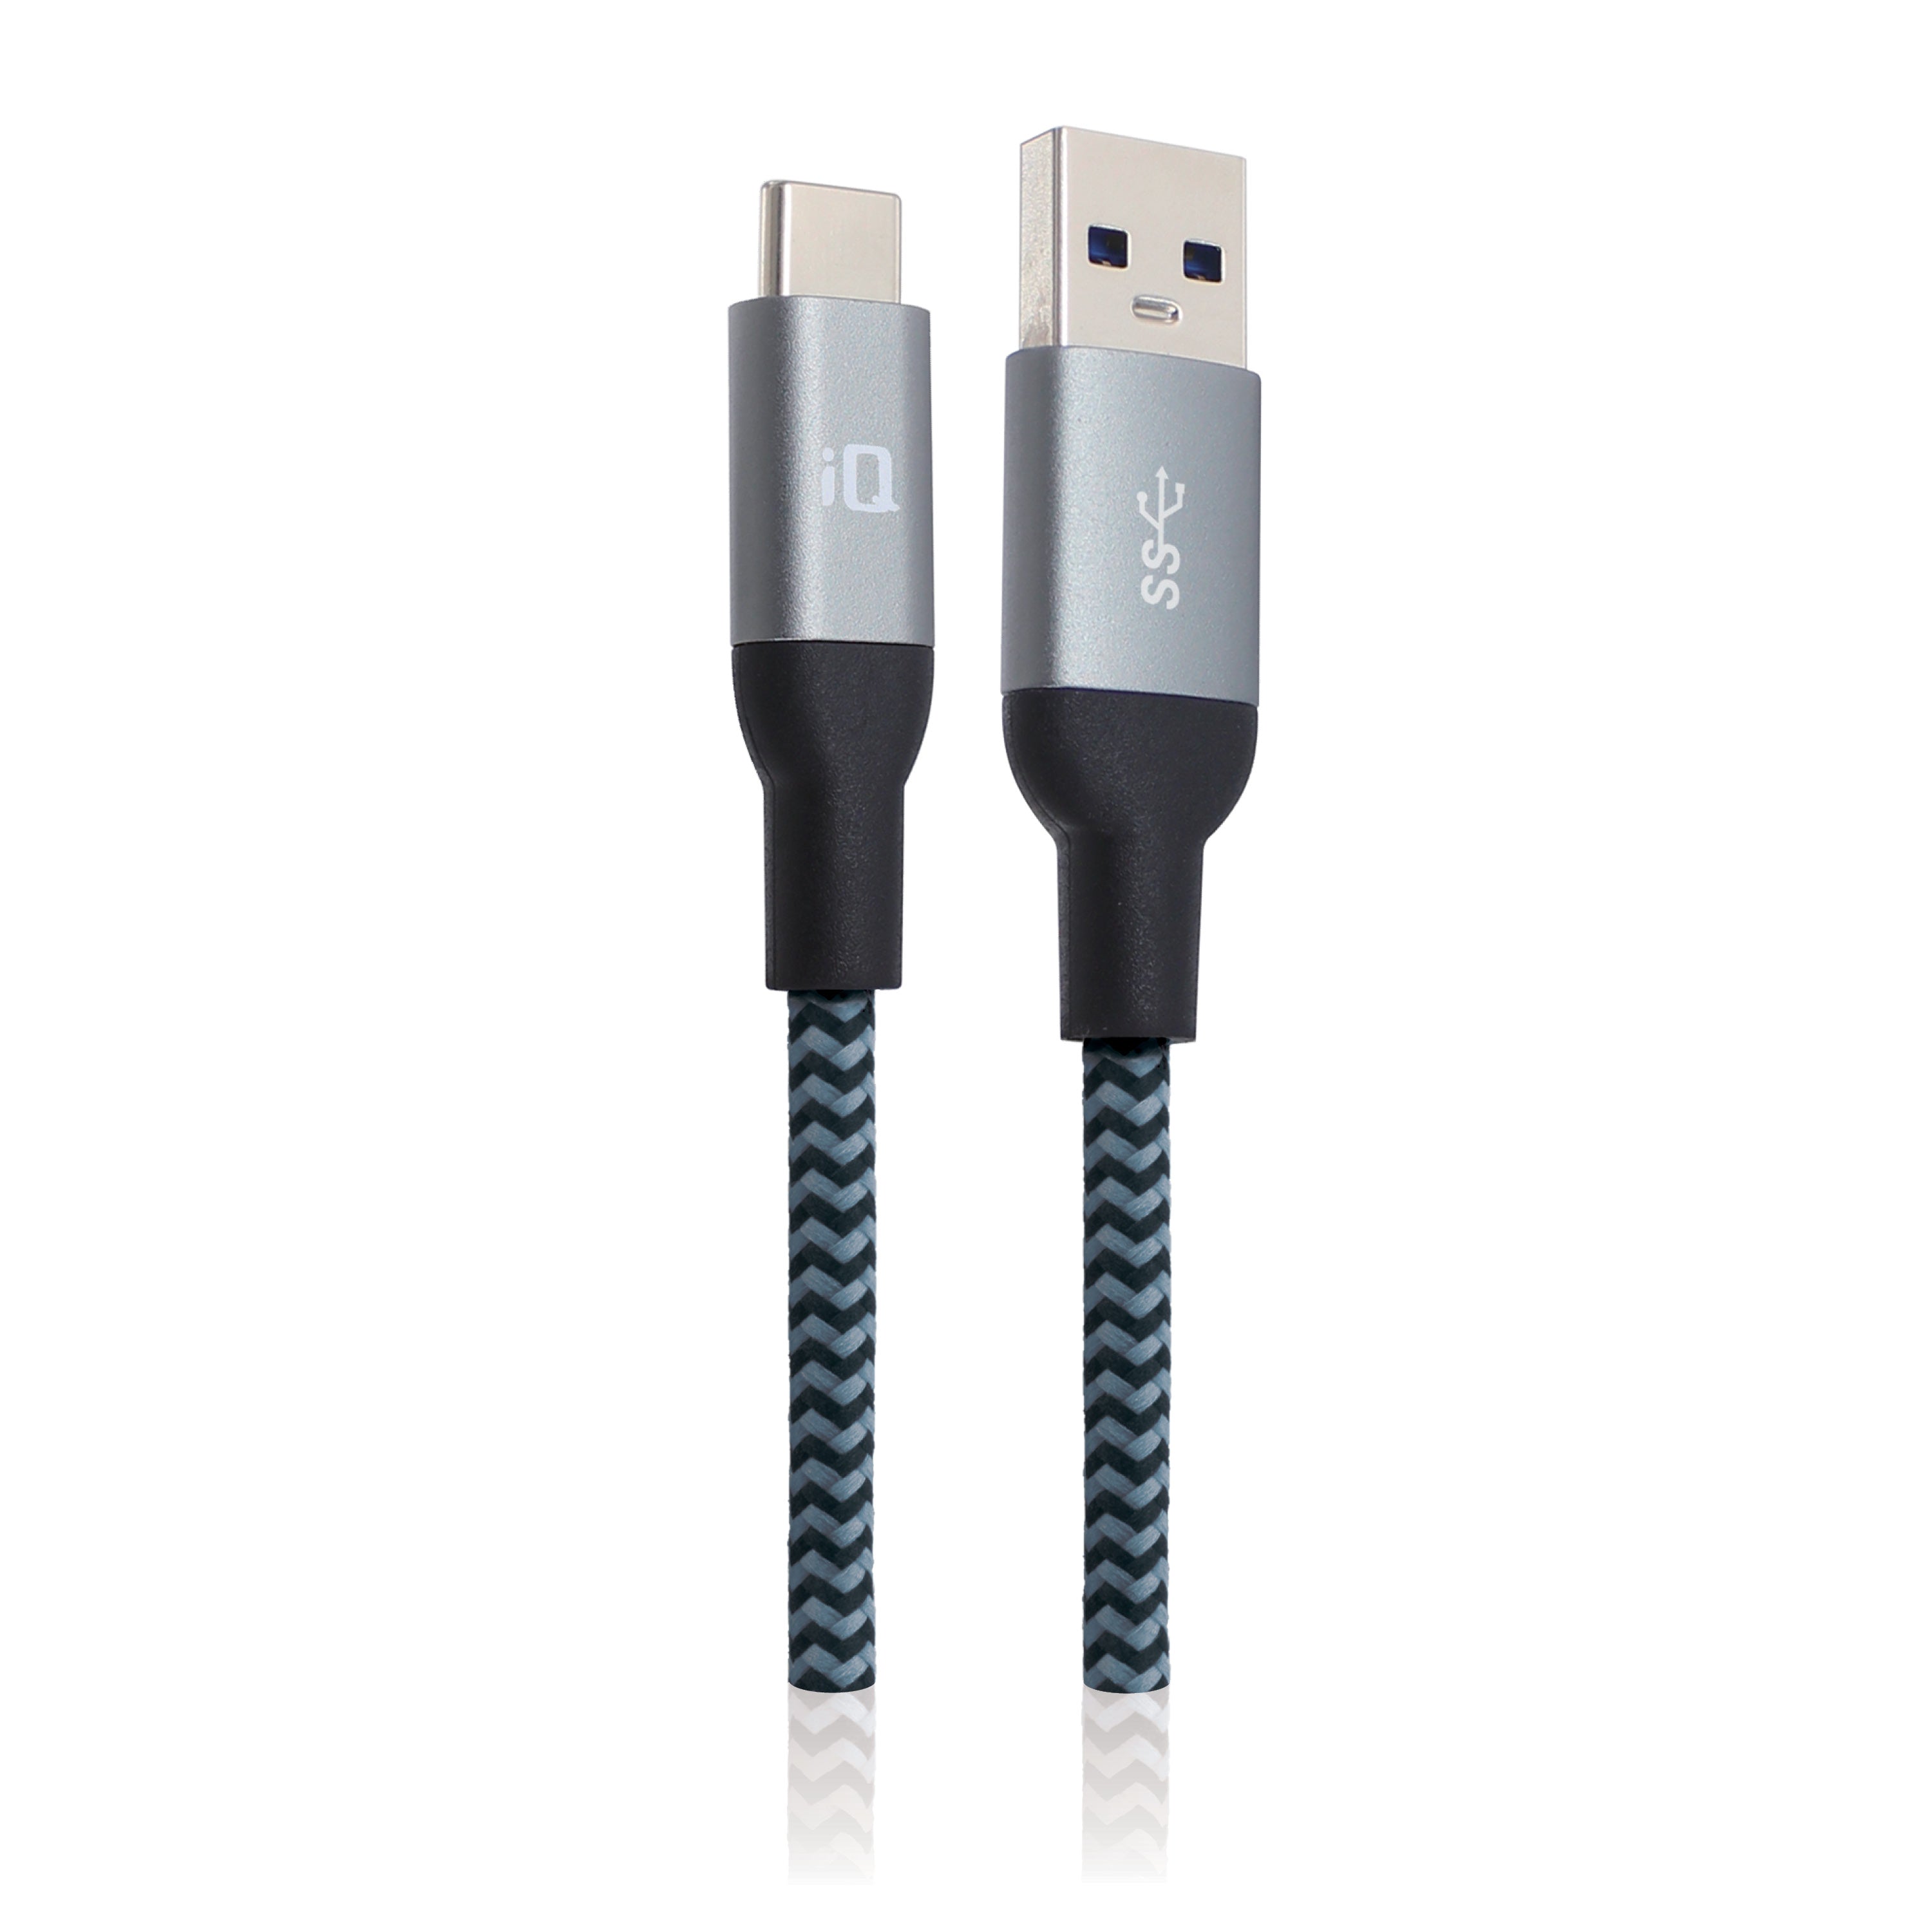 iQ USB Type-C to USB Type-A Cable - 2.1m/7ft